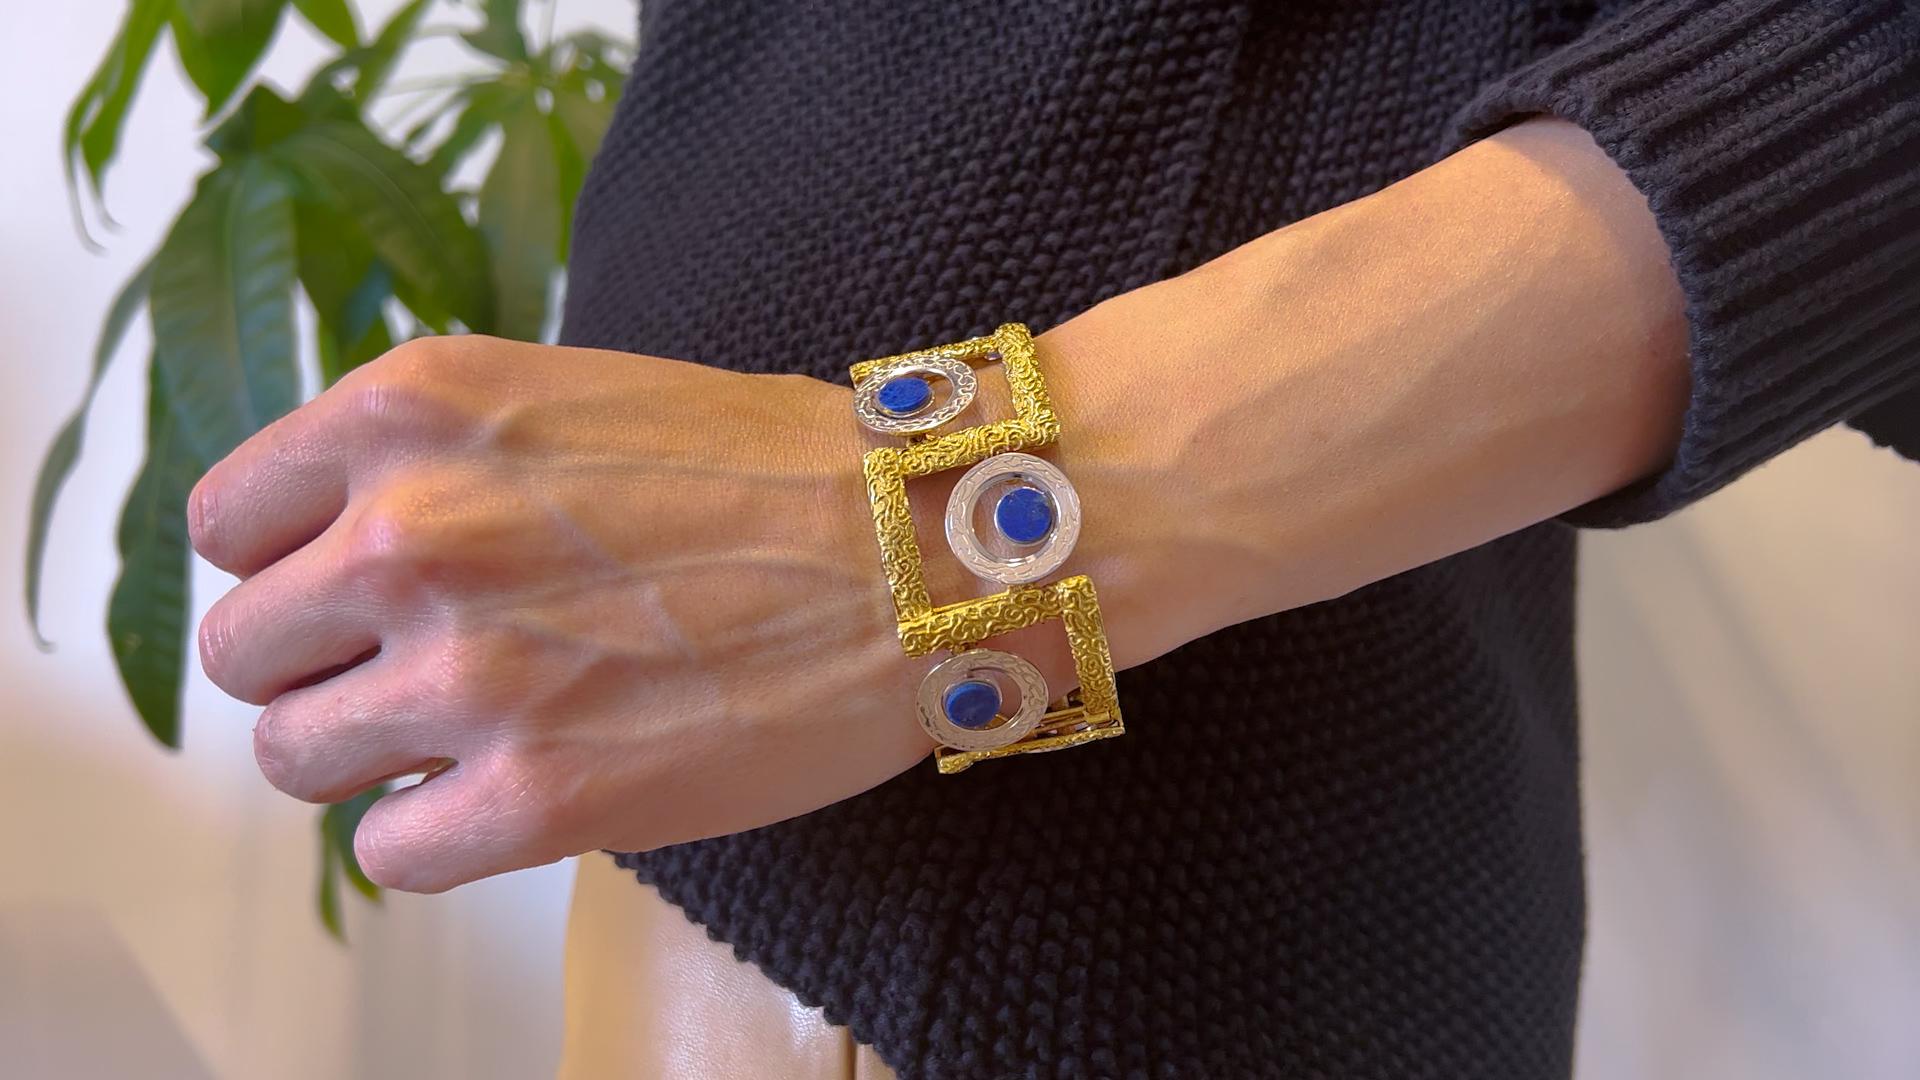 One Vintage Italian Lapis Lazuli 18k Gold Two Tone Bracelet. Featuring 7 pieces of polished lapiz lazuli. Crafted in 18 karat yellow and white gold, signed Galoppi and Unoaerre with Italian hallmarks. Circa 1970. The bracelet measures 7 inches in